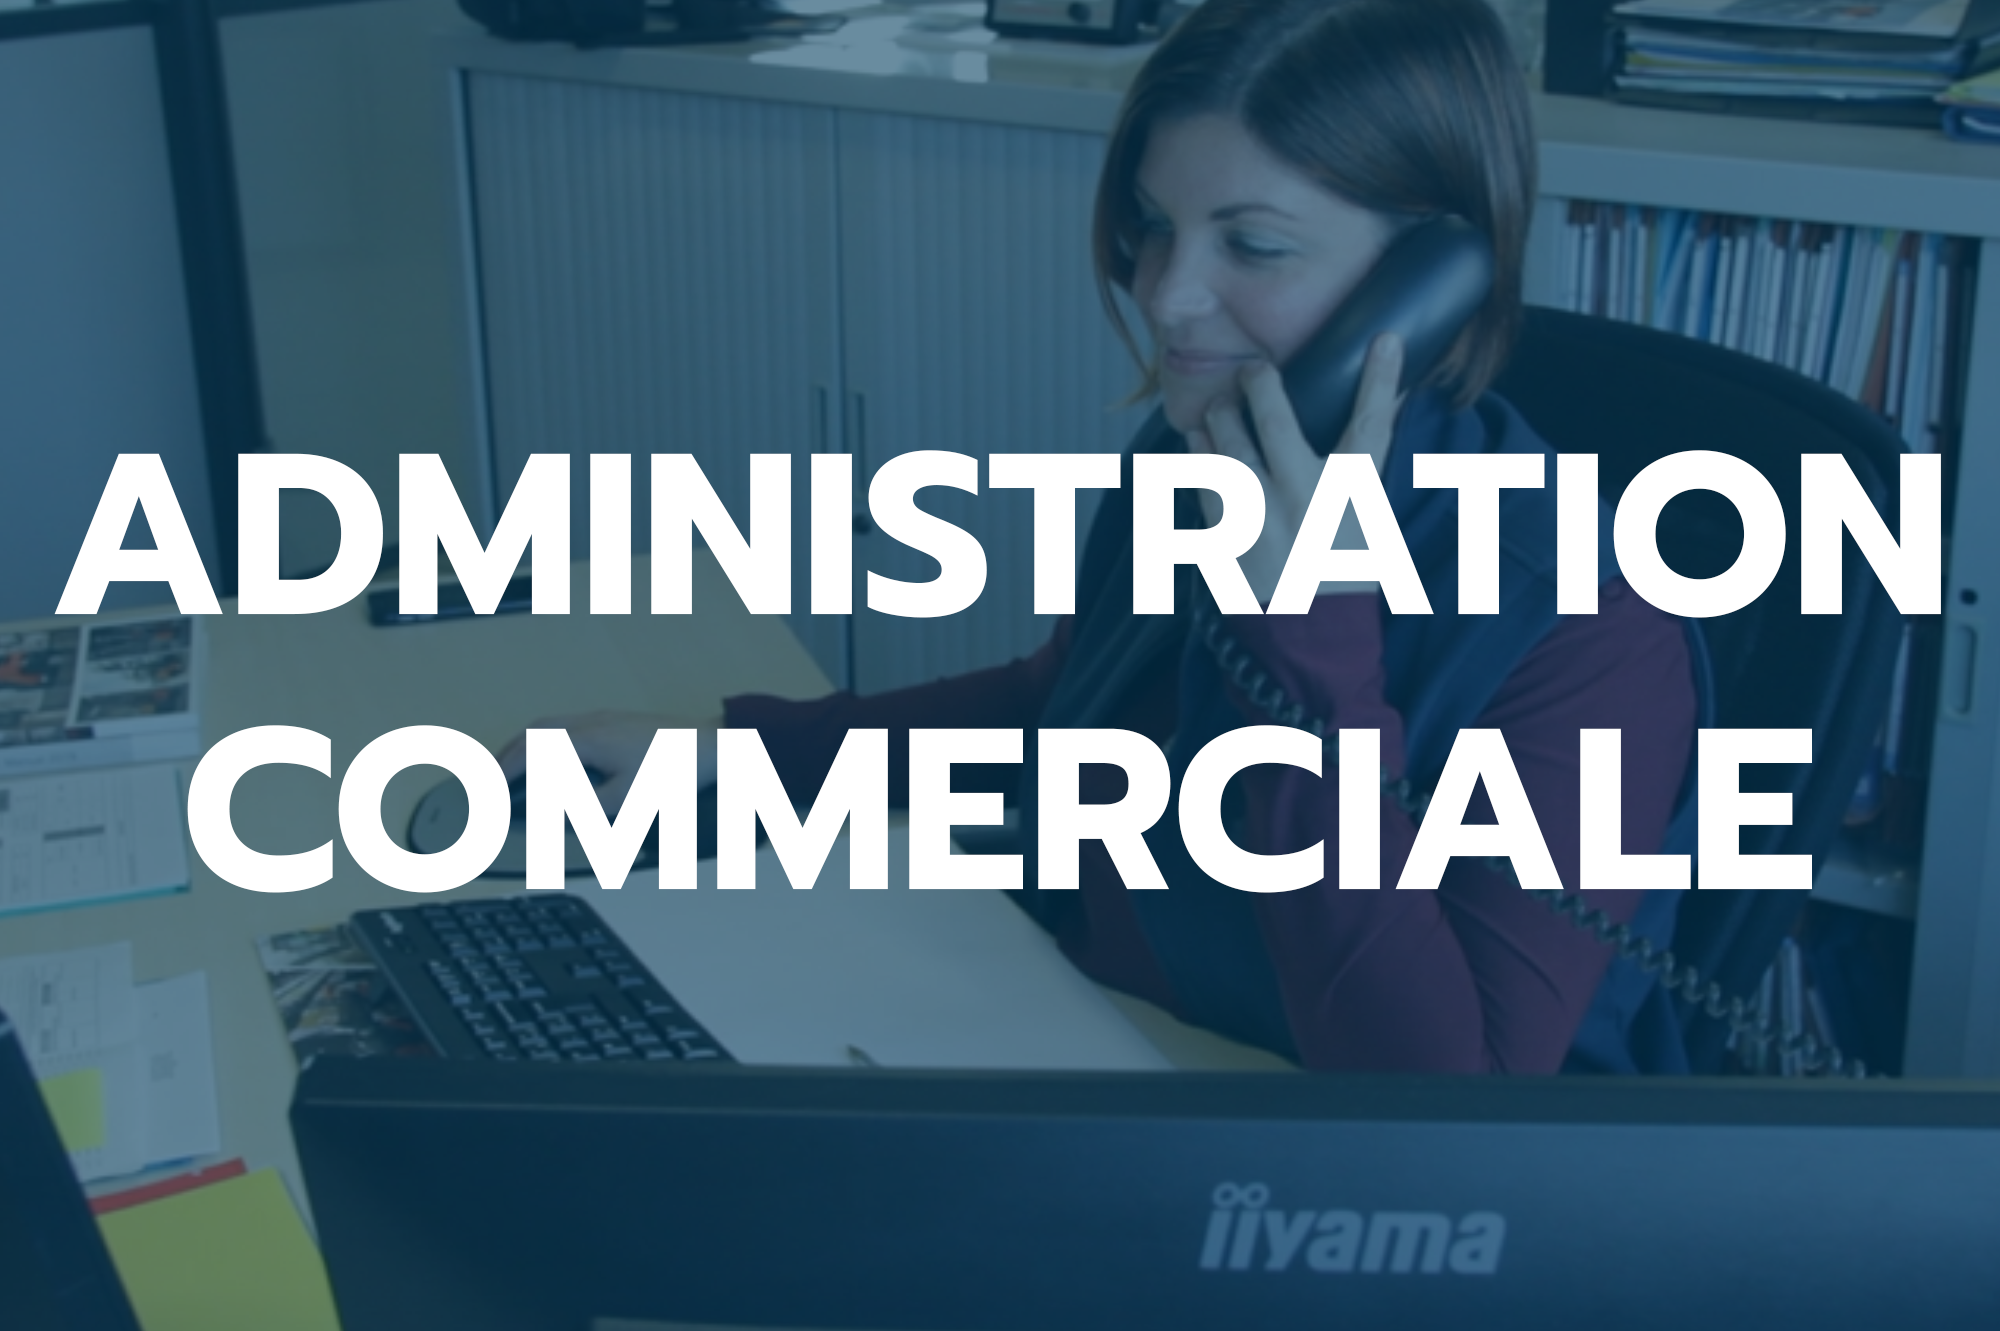 Administration commerciale